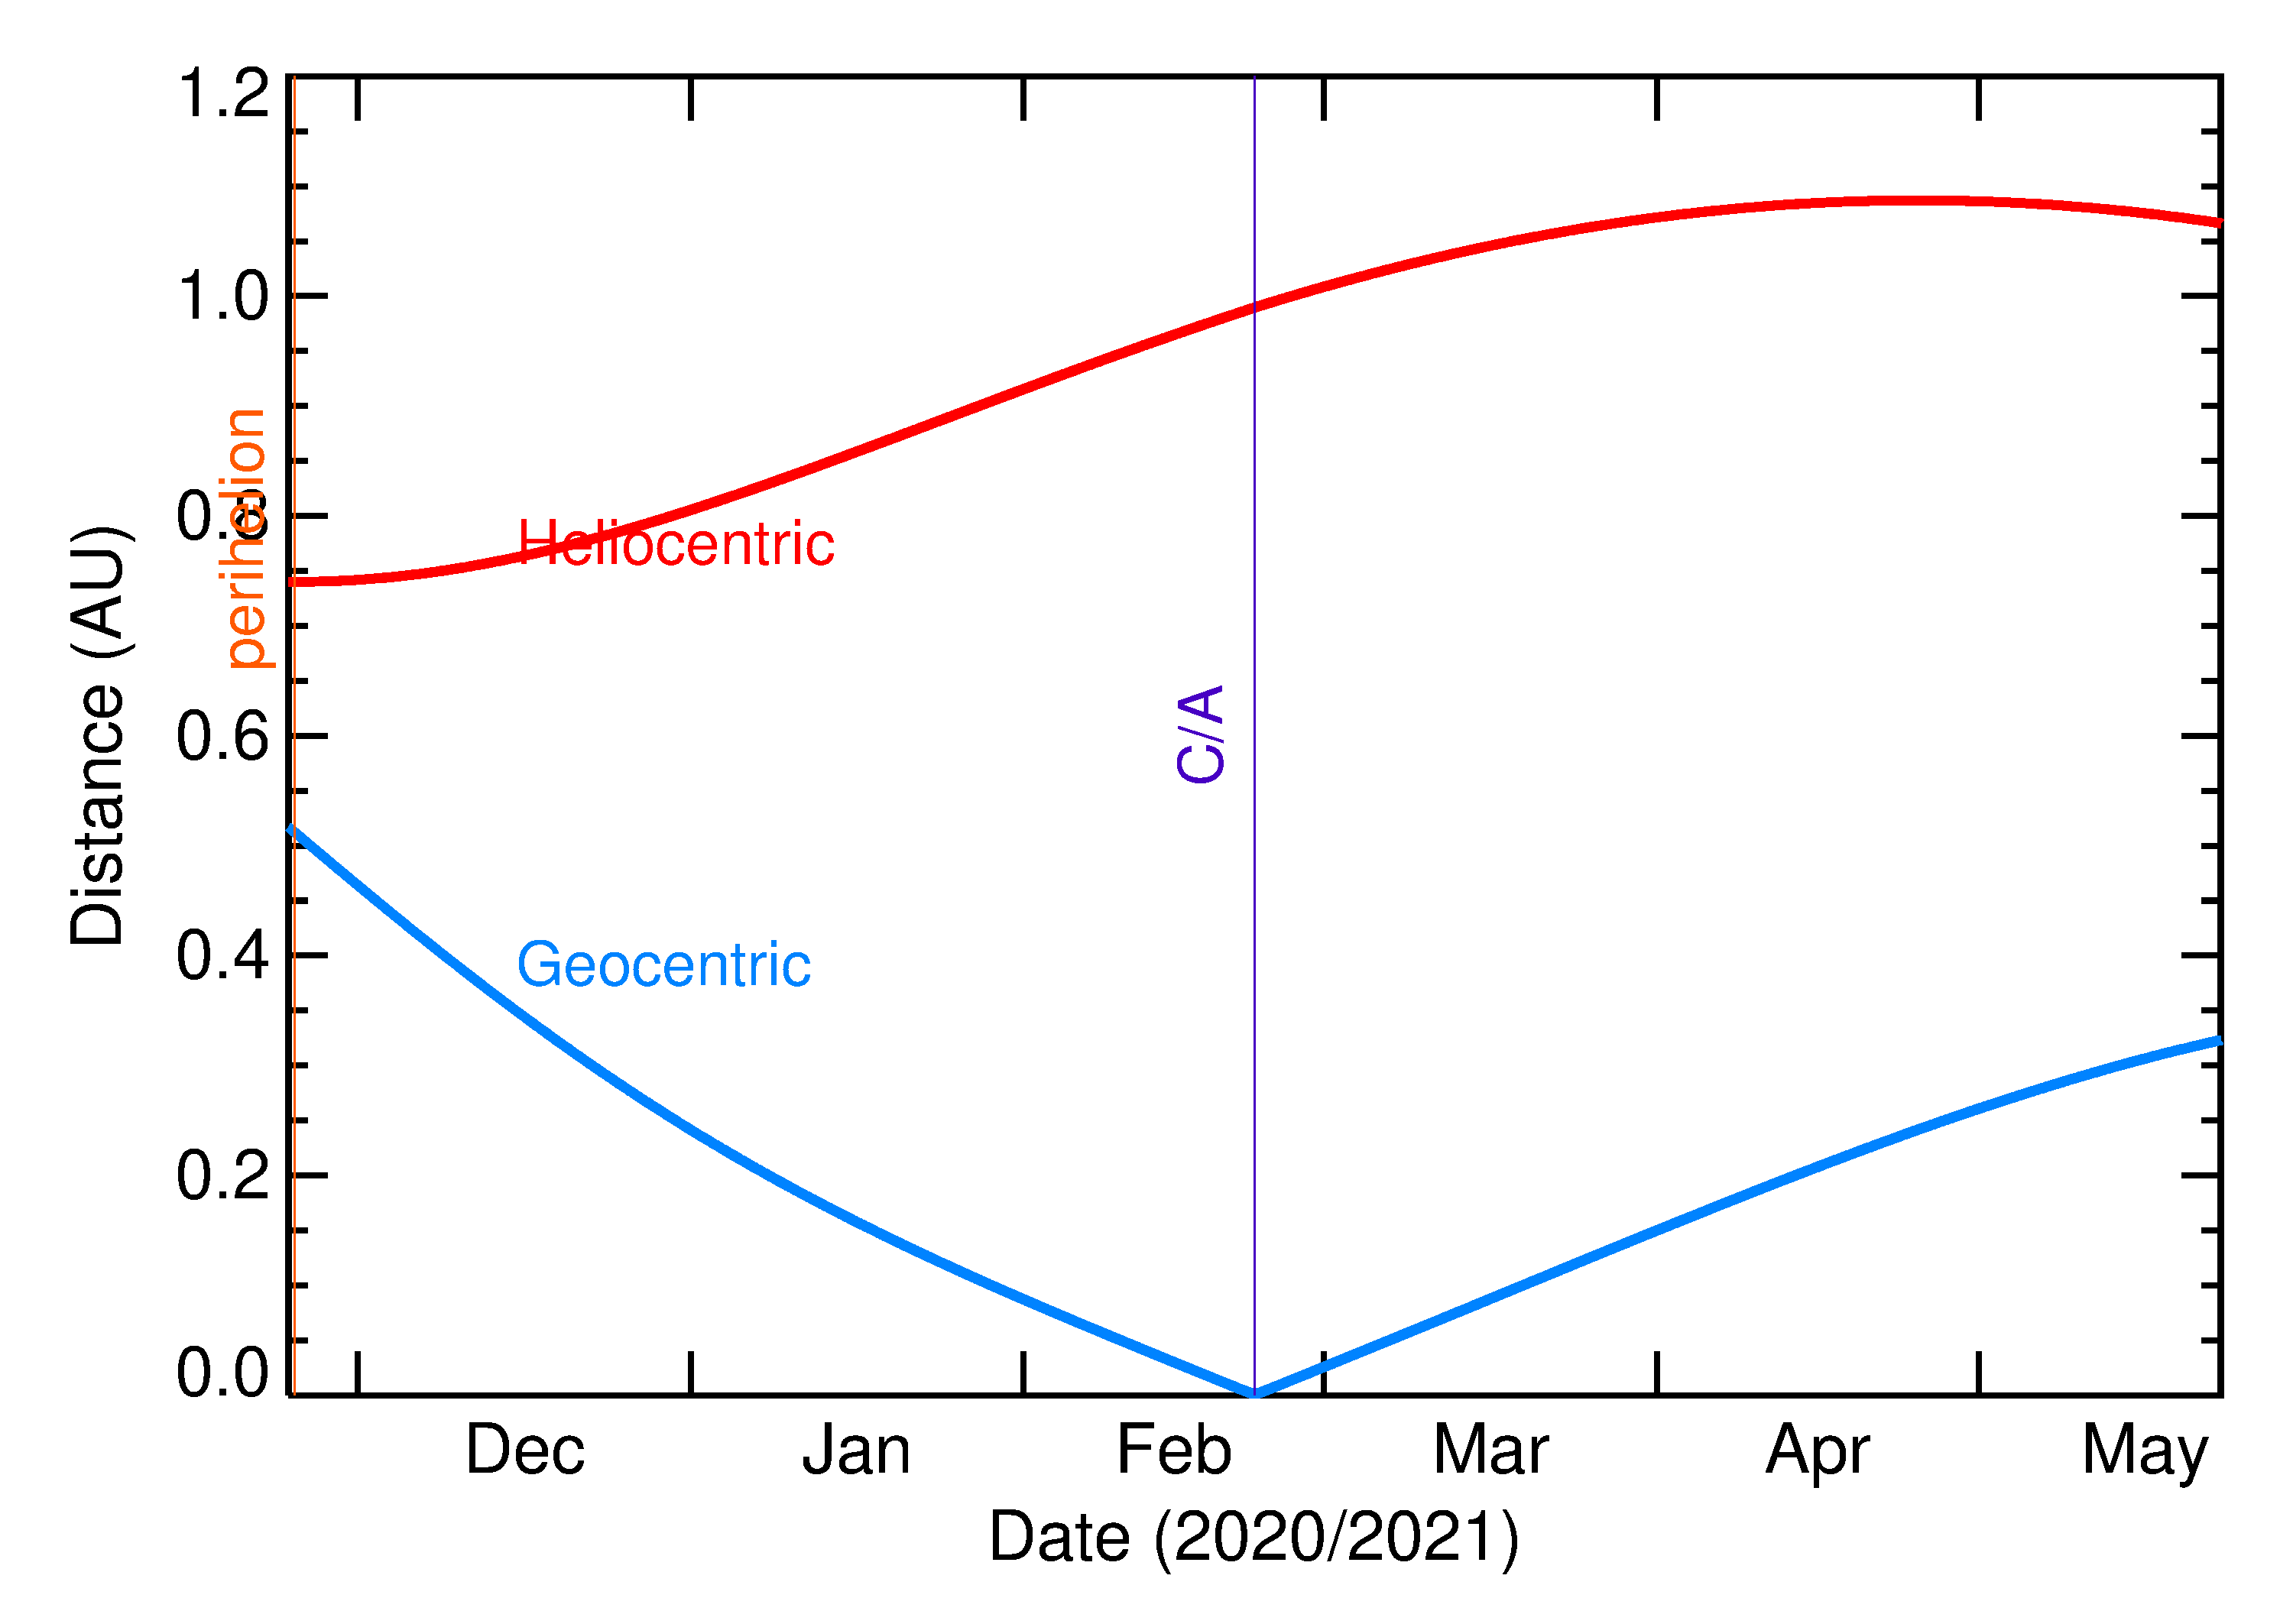 Heliocentric and Geocentric Distances of 2021 DA2 in the months around closest approach